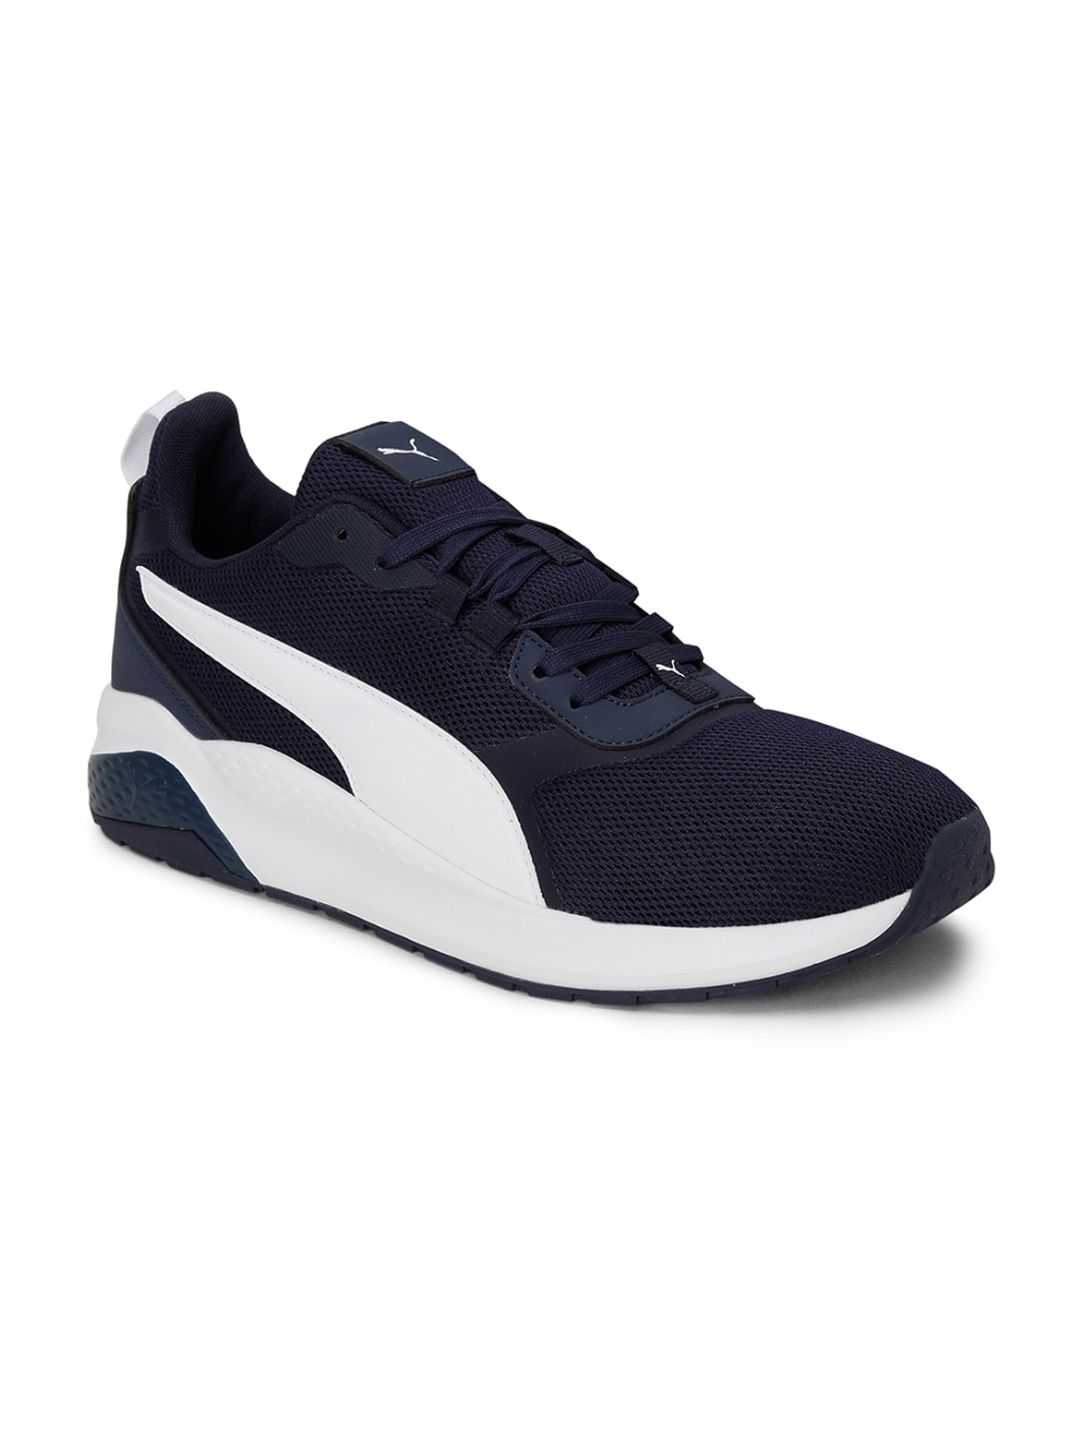 Puma Blue Solid Casual Sneakers Price in India